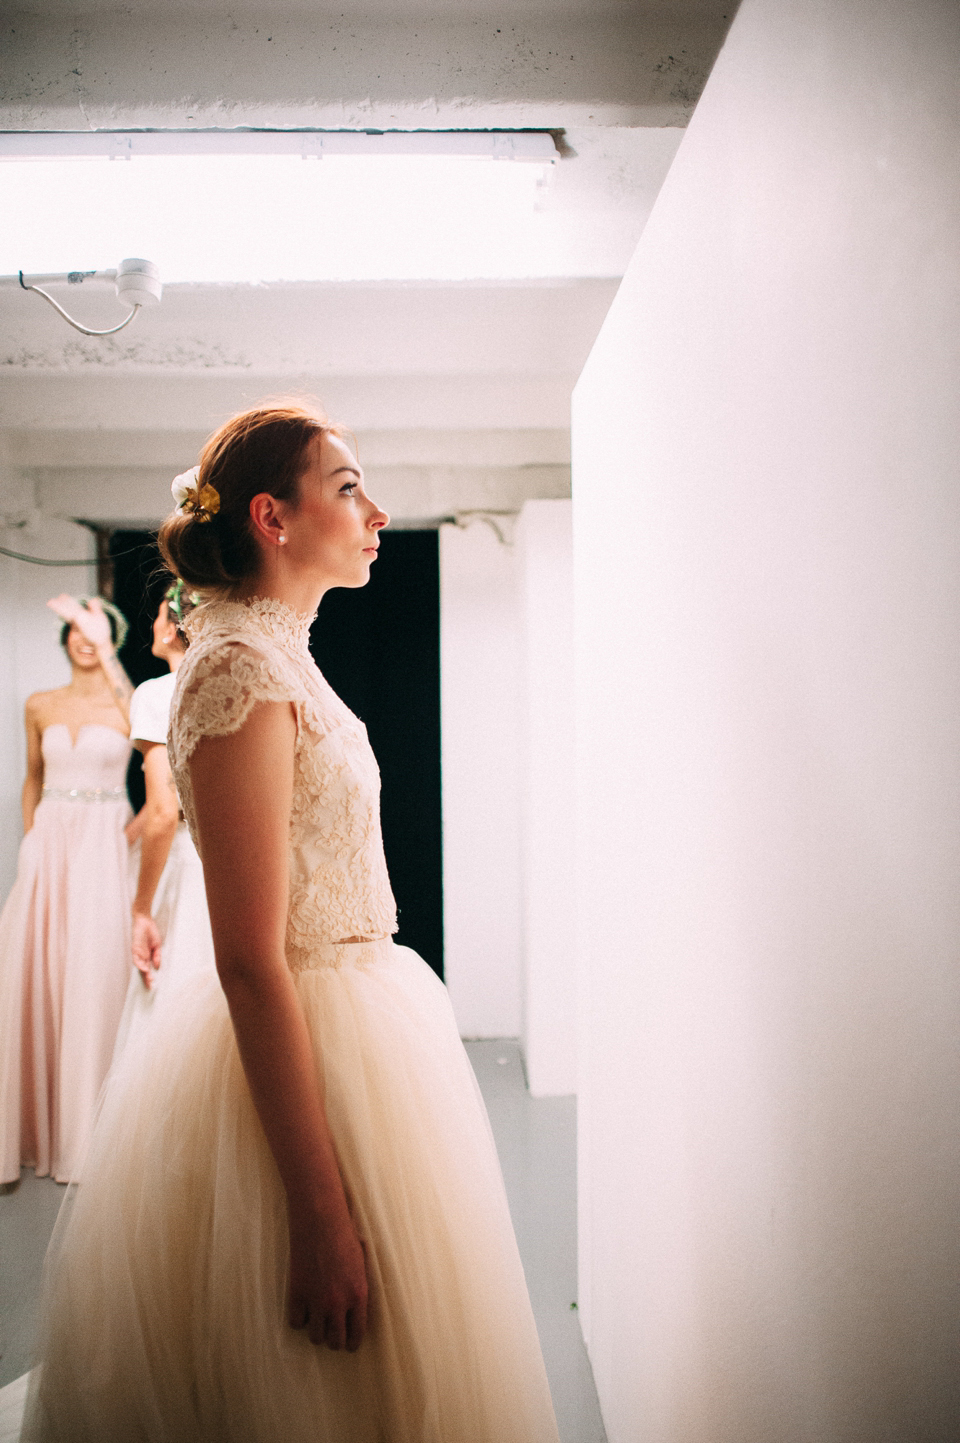 Elizabeth Stuart 'The Enchantment of The Seasons' Autumn/Fall 2014 Bridal Wear Collection // Photography by Hannah May